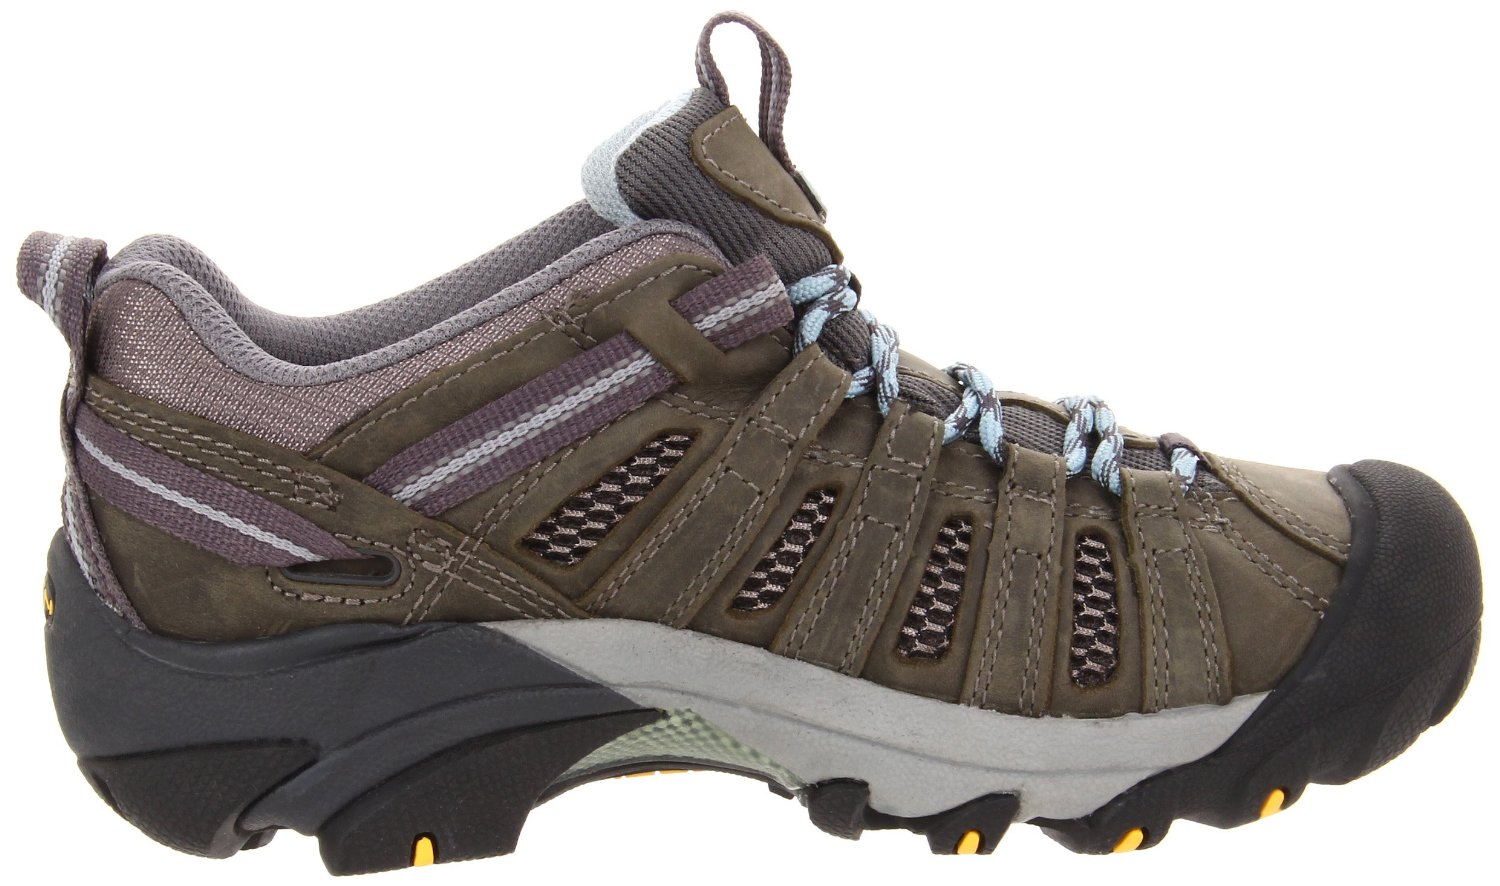 Hiking Shoes Here: Keen Women's Voyageur Trail Shoe,Charcoal/Sterling ...